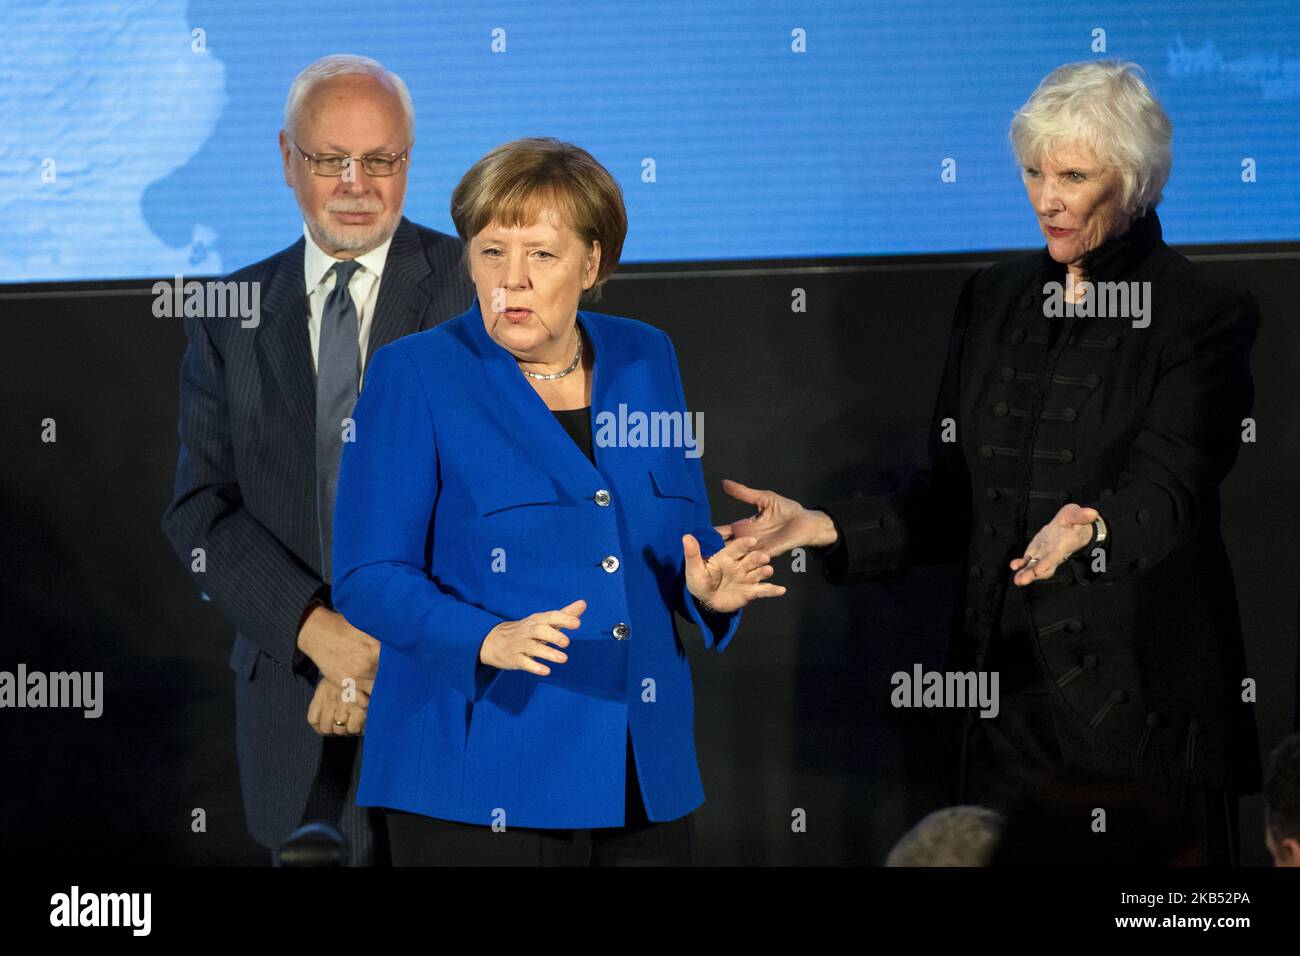 German Chancellor Angela Merkel (C) is pictured during the Fulbright Prize for International Understanding awarding ceremony in Berlin, Germany on January 28, 2019. (Photo by Emmanuele Contini/NurPhoto) Stock Photo